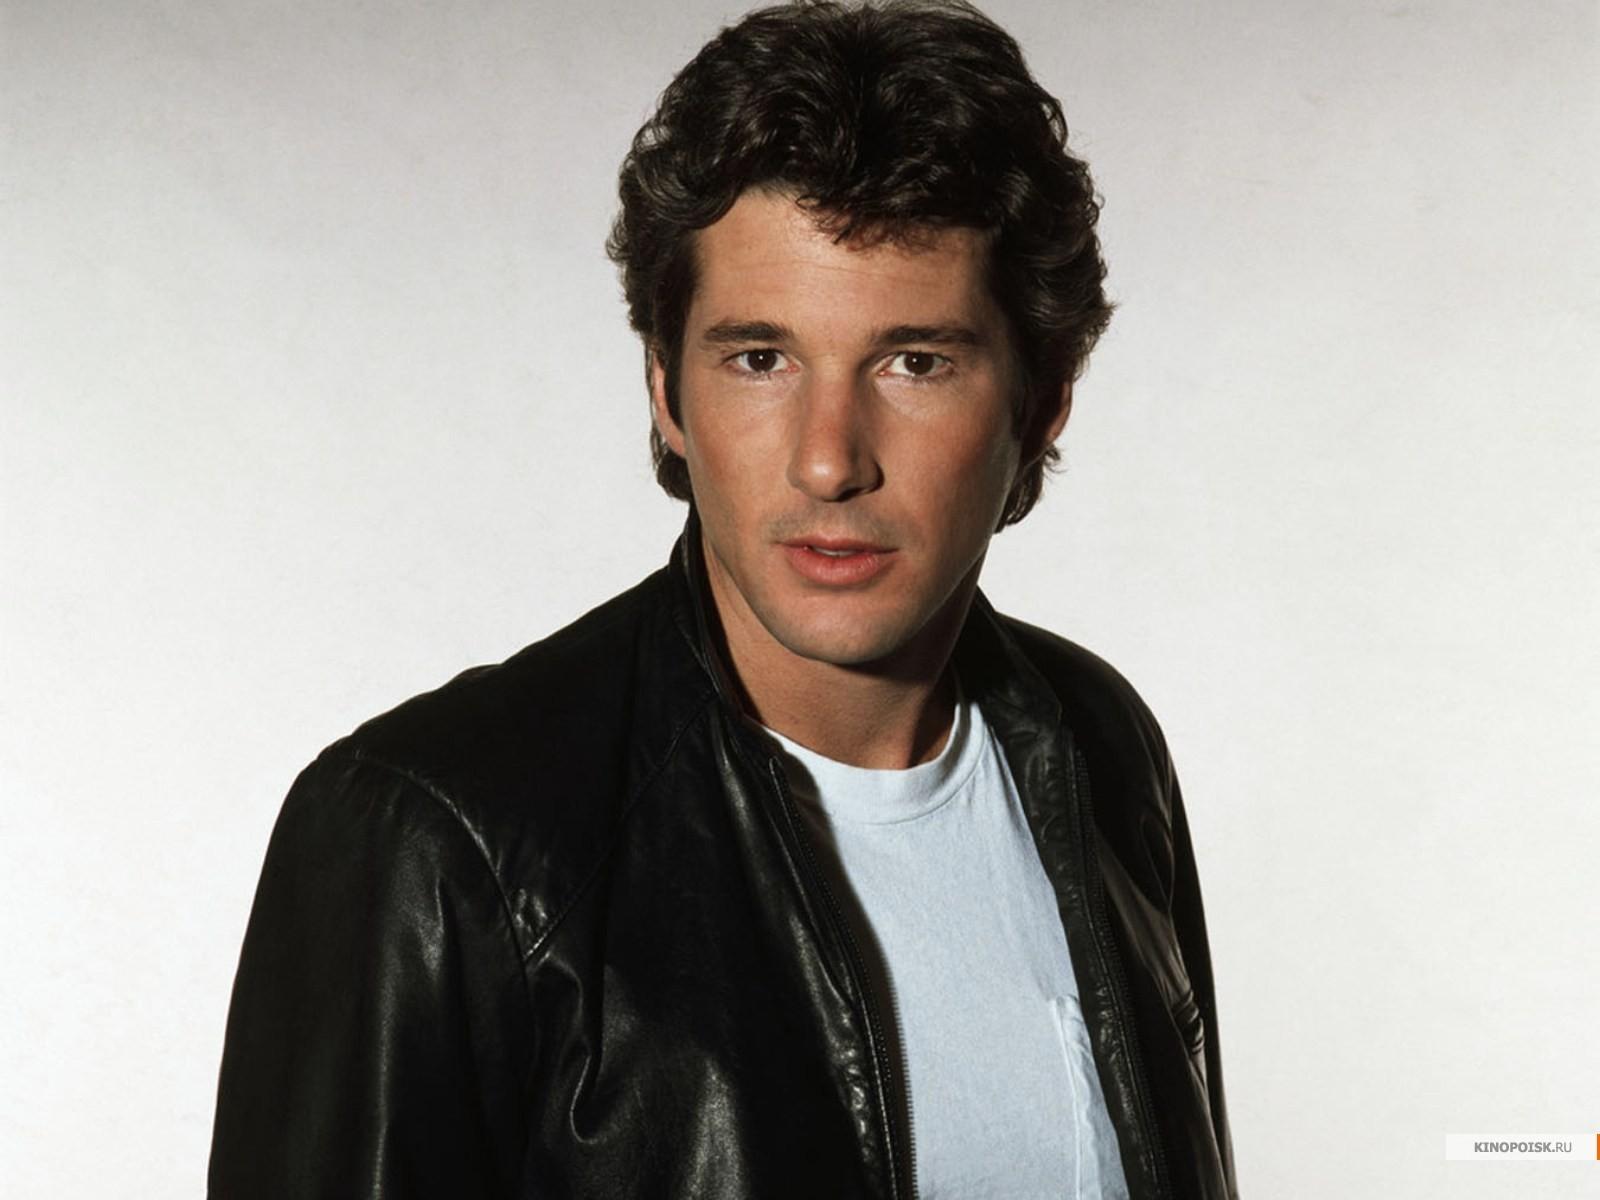 Richard Gere image Richard Gere HD wallpaper and background photo